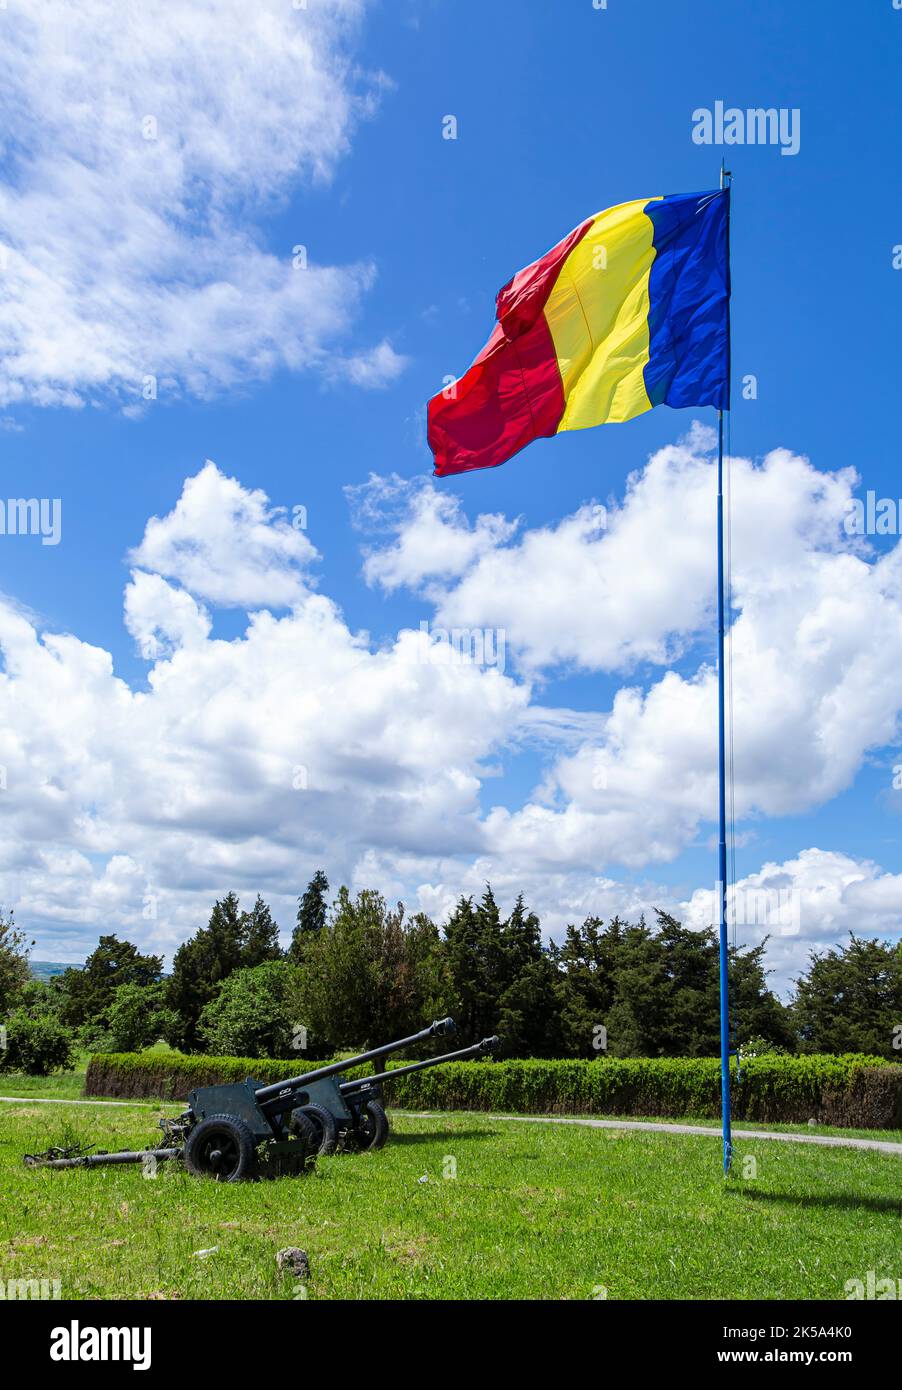 Romanian flag and Cannons placed at the monument to Romanian heroes of World War II on may 30, 2021 in Oarba de Mures, Transylvania Stock Photo